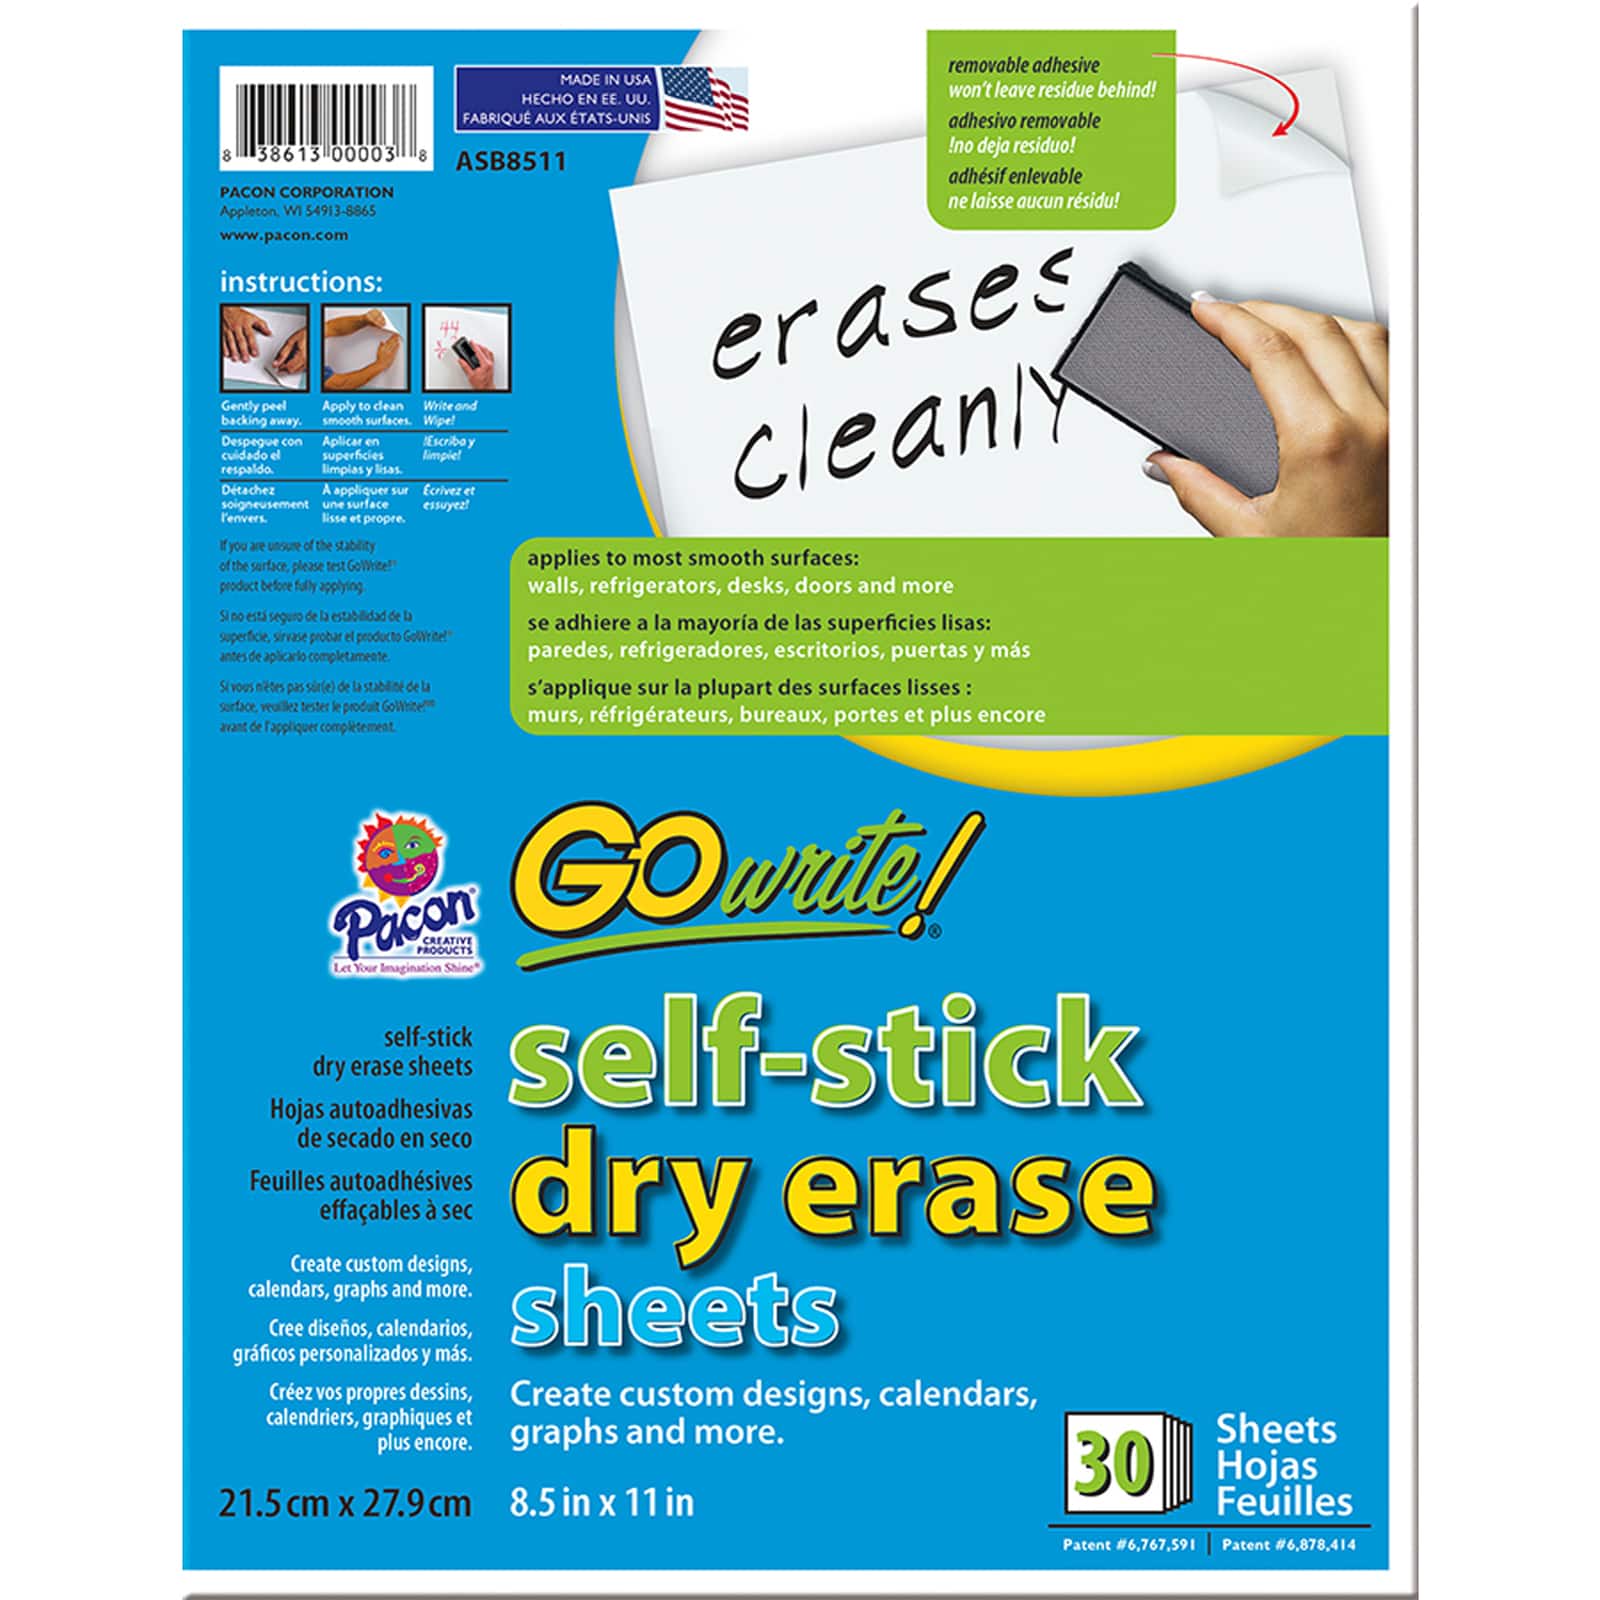 GoWrite!® Self-Stick Dry Erase Sheets, Pack of 30 | Michaels